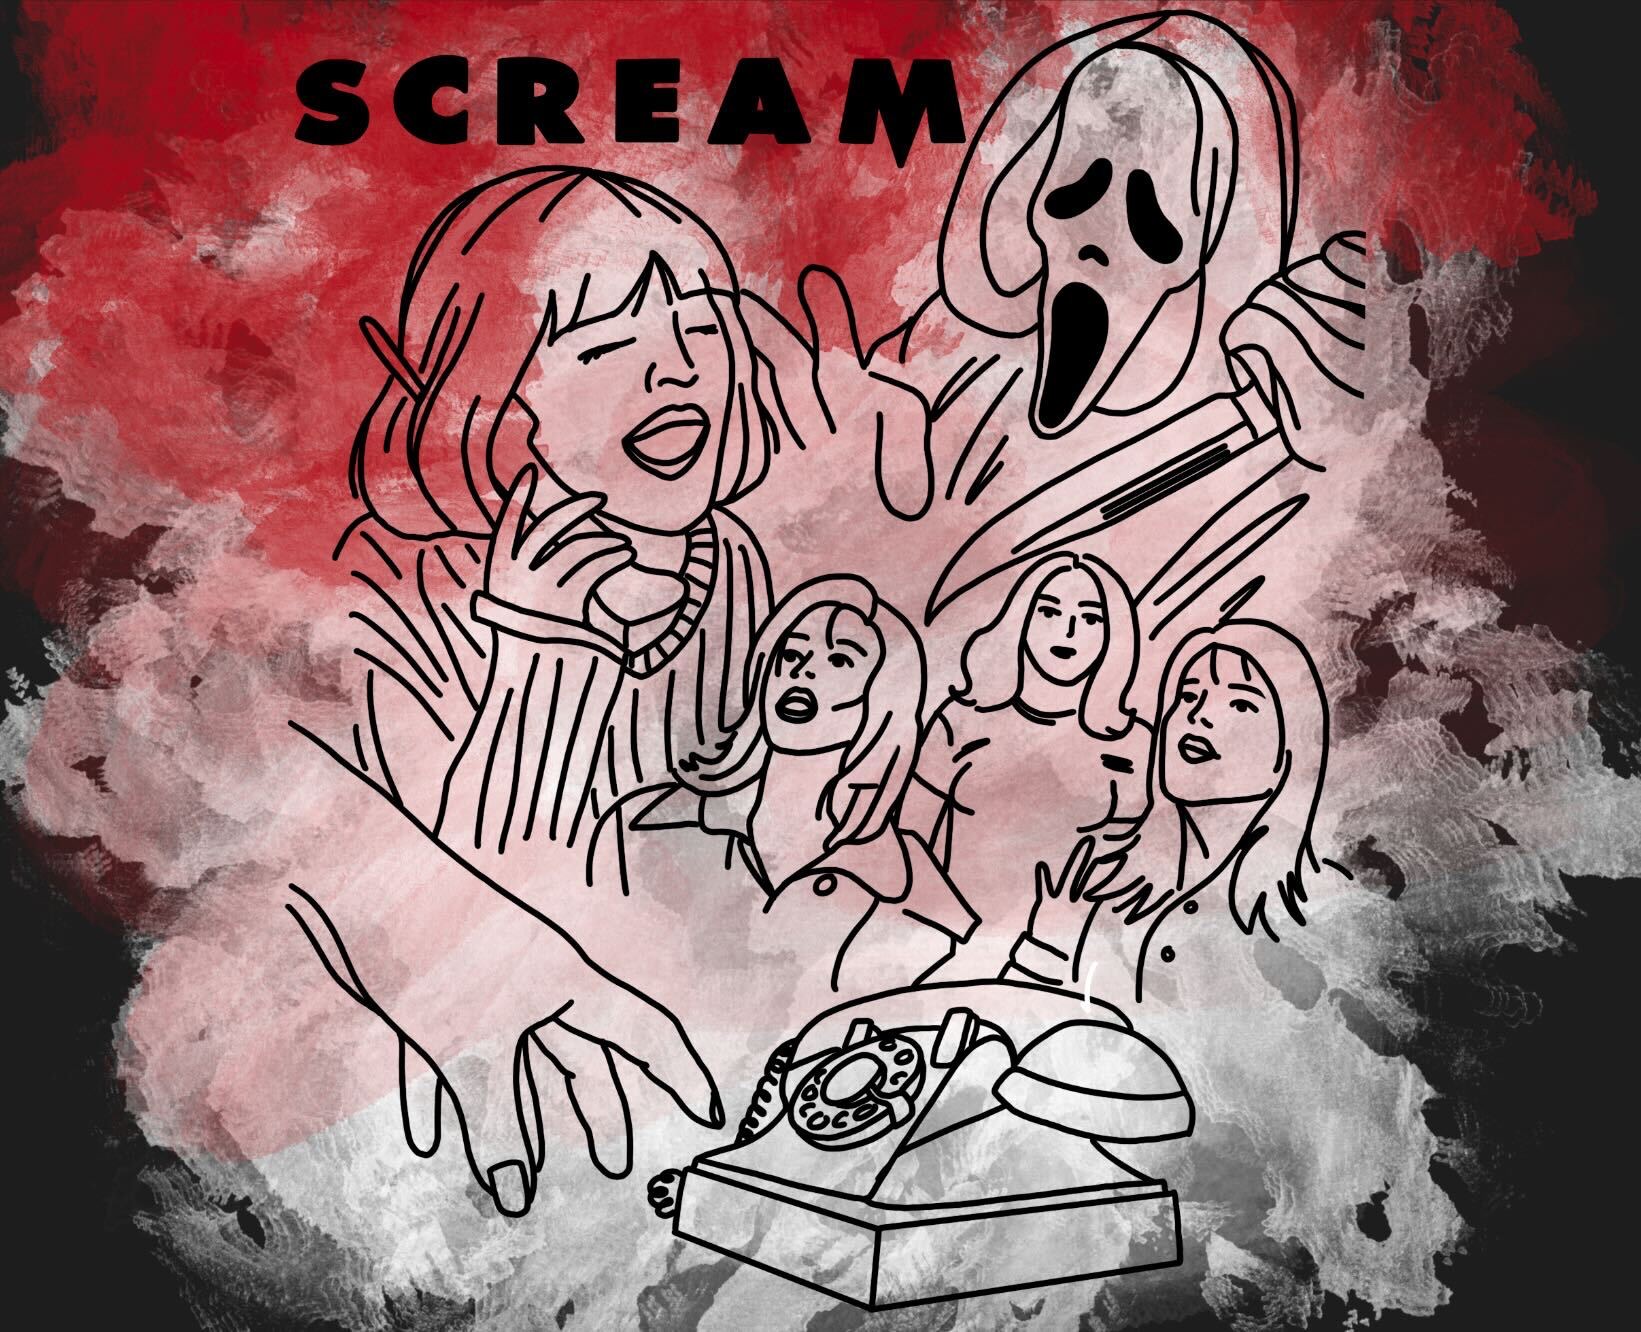 If you are a fan of the classic horror movie Scream, then take this test!